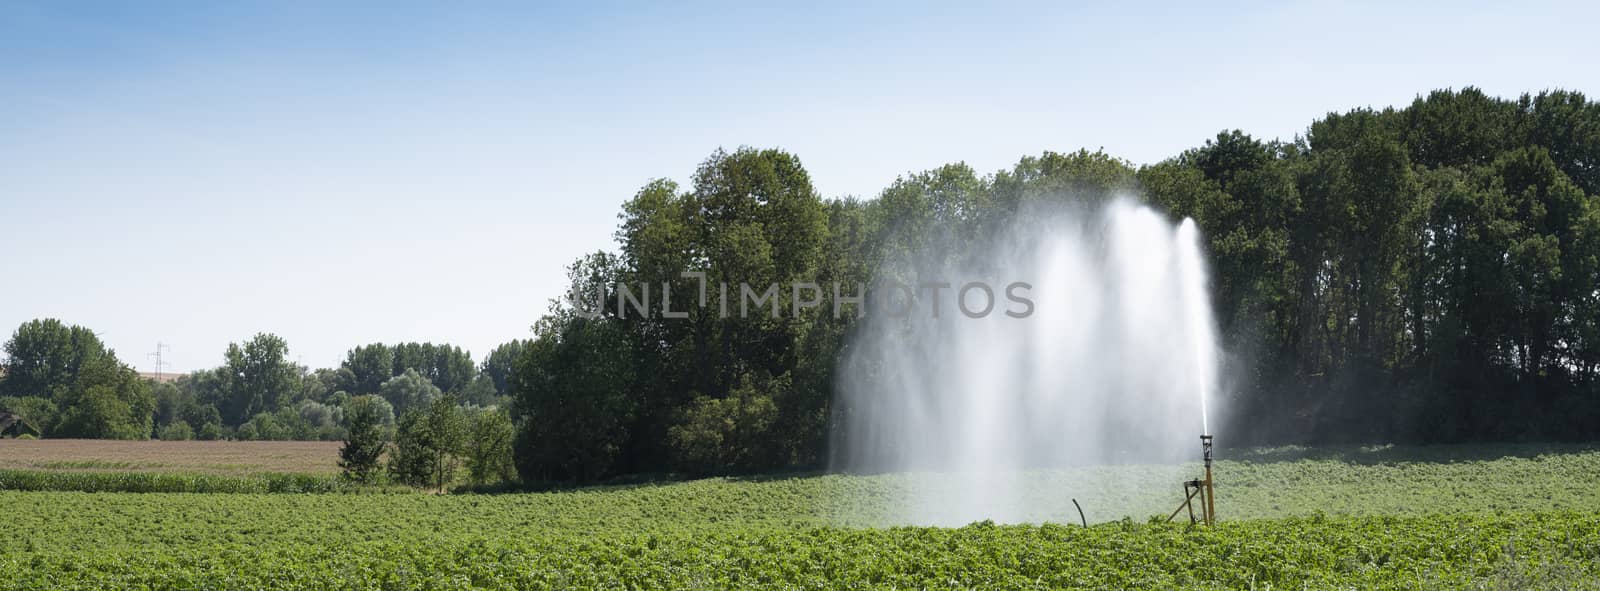 irrigation of crop on field in the north of france by ahavelaar